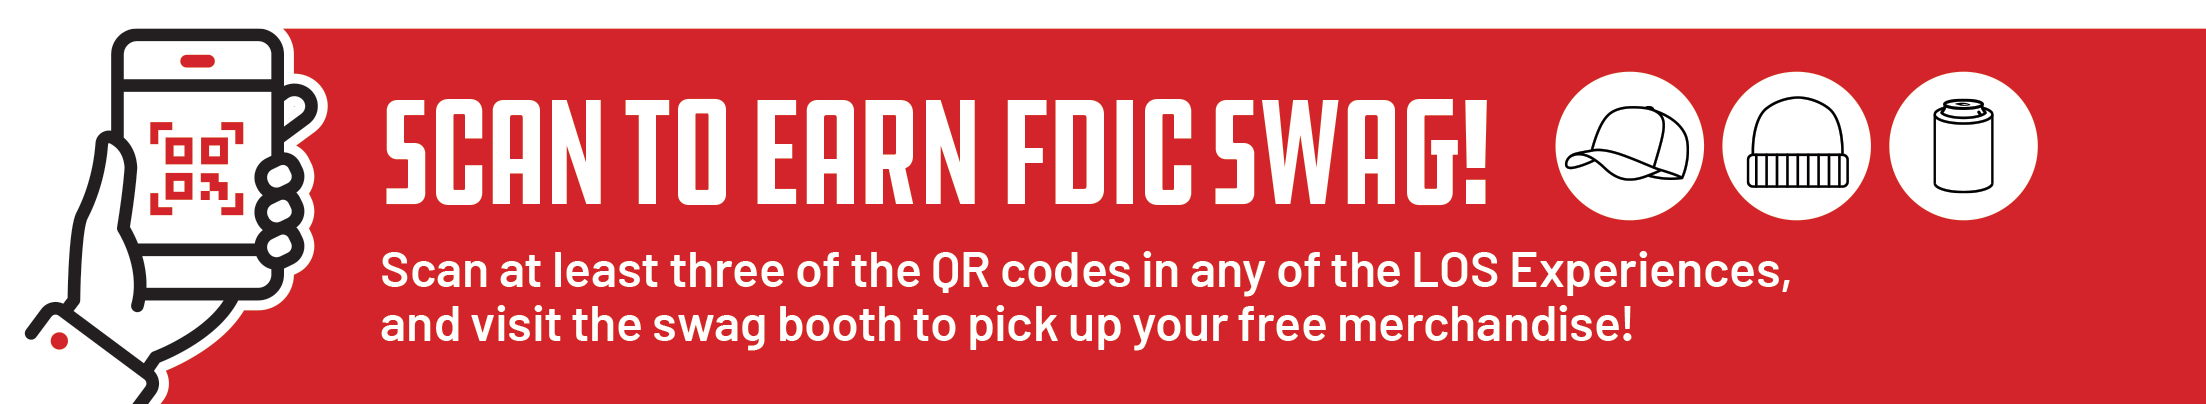 Scan to Earn FDIC Swag!